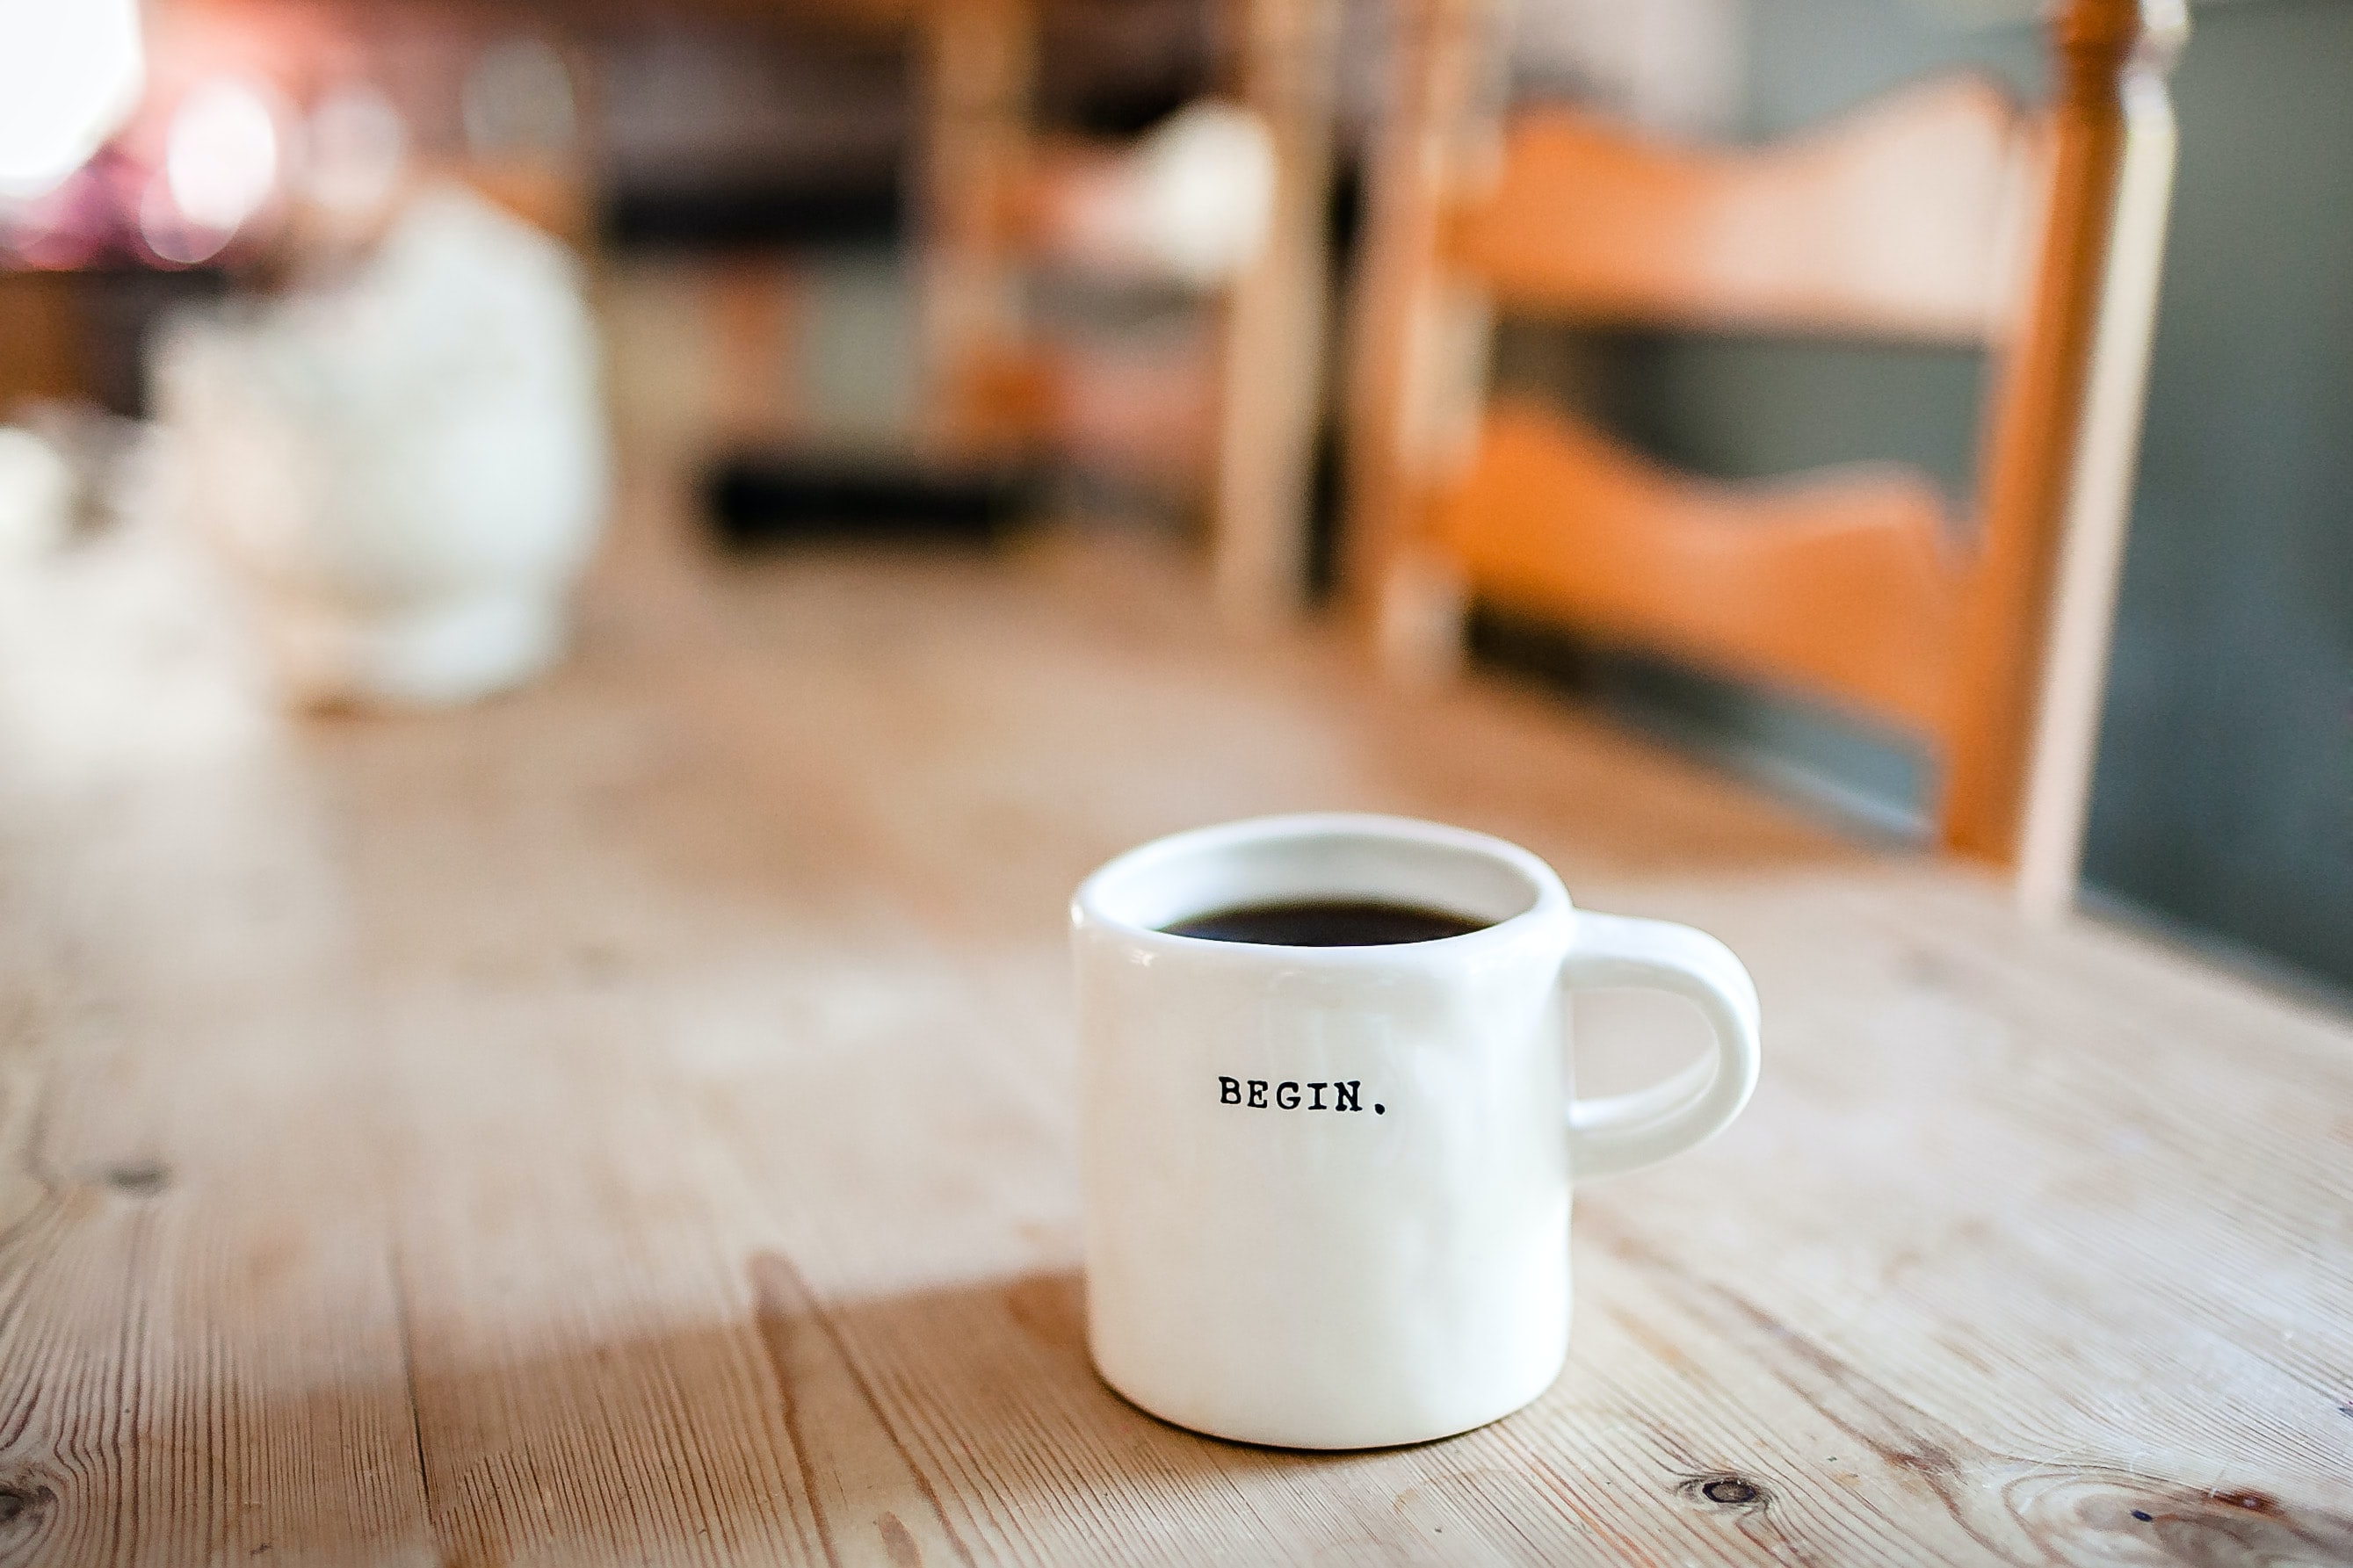 Mug on Table with "Begin" on it